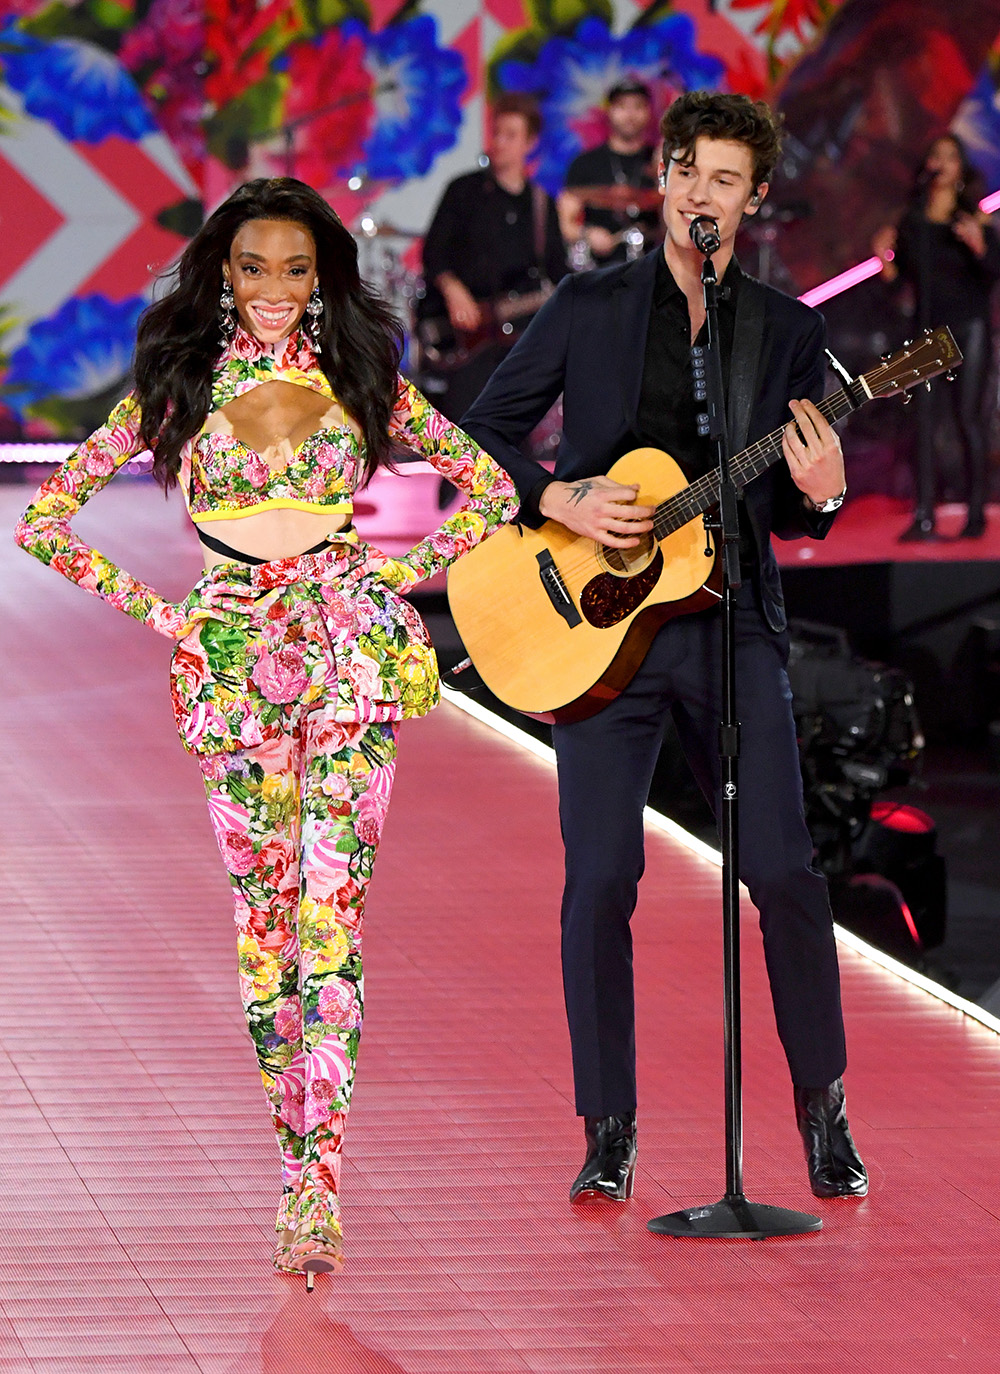 NEW YORK, NY - NOVEMBER 08: Winnie Harlow walks the runway while Shawn Mendes performs during the 2018 Victoria's Secret Fashion Show at Pier 94 on November 8, 2018 in New York City. (Photo by Kevin Mazur/WireImage)